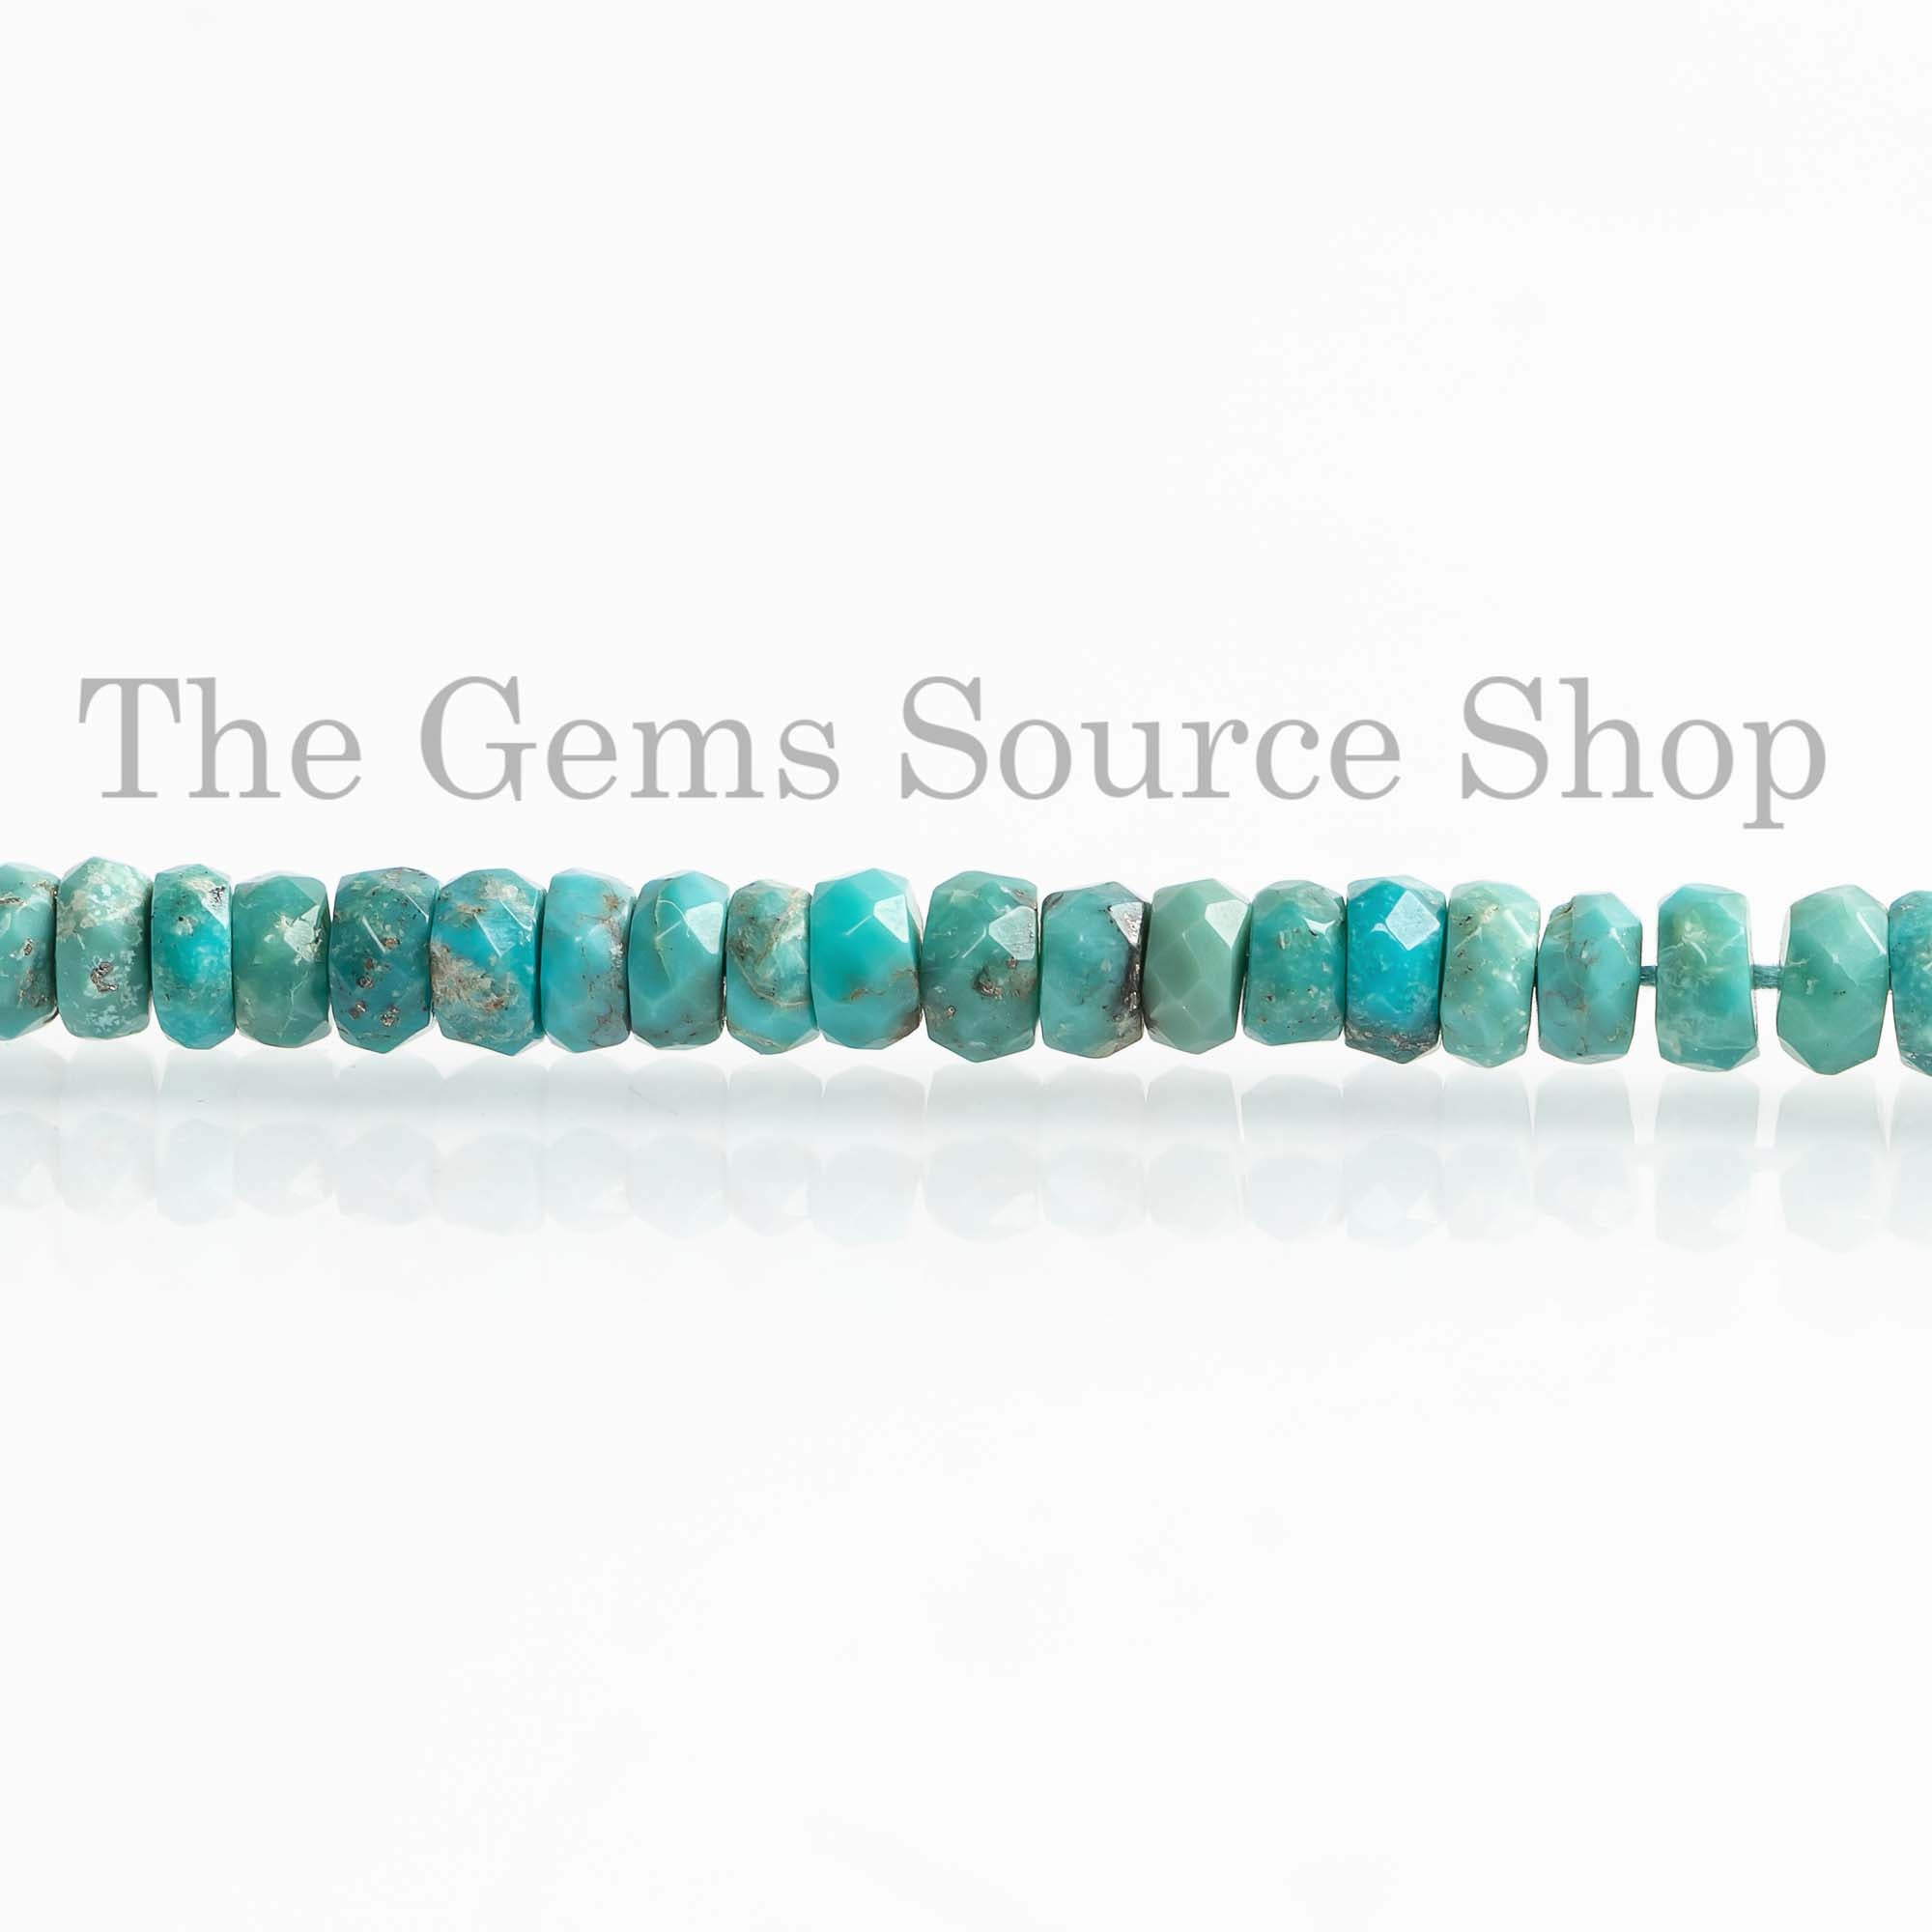 4.5-5.5mm Natural Turquoise Rondelle, Arizona Turquoise Beads, Faceted Beads, Turquoise Rondelle, Necklace Beads For Jewelry